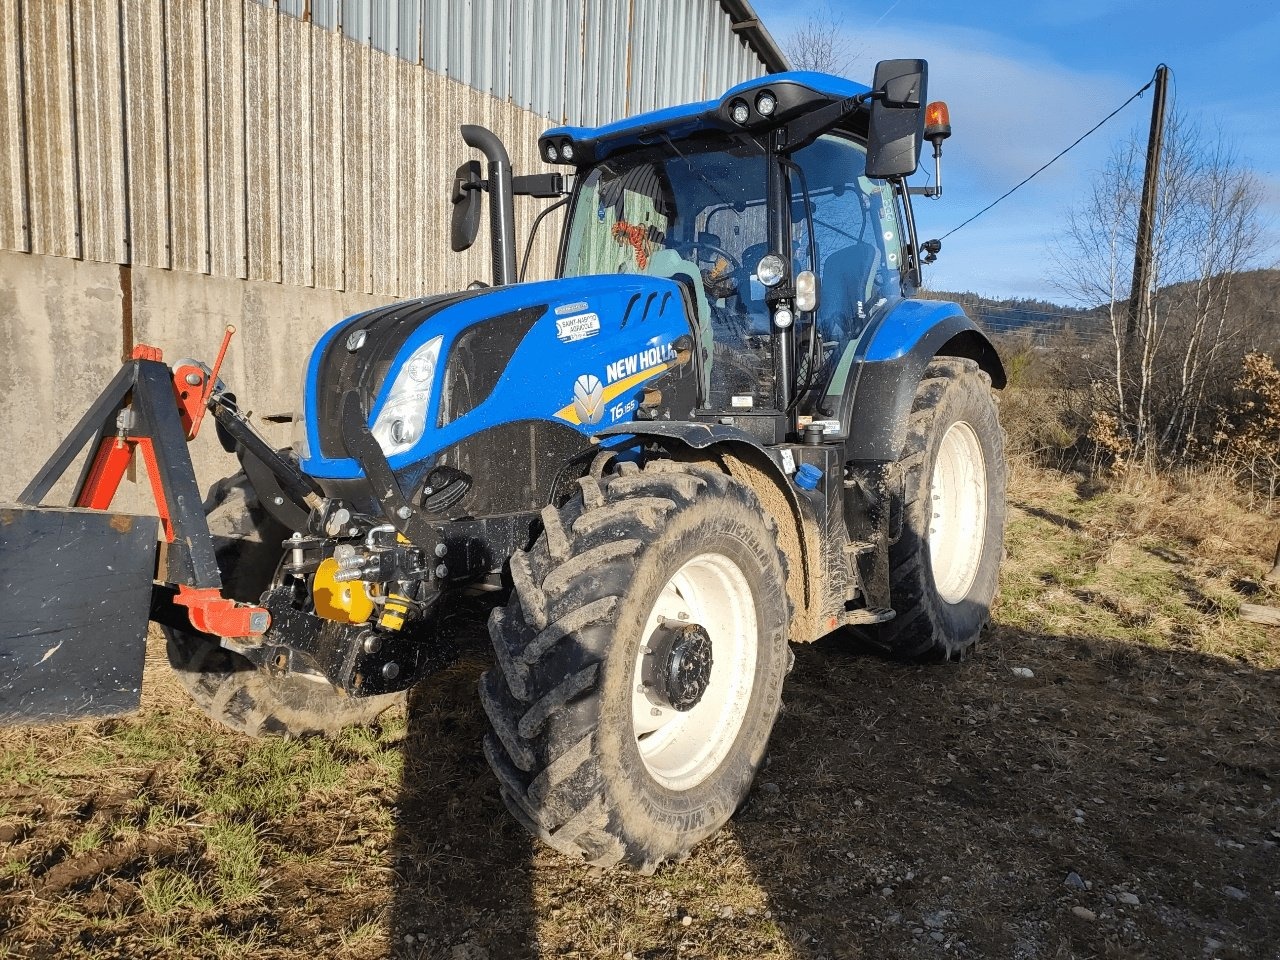 New Holland T 6.155 tractor €79,000